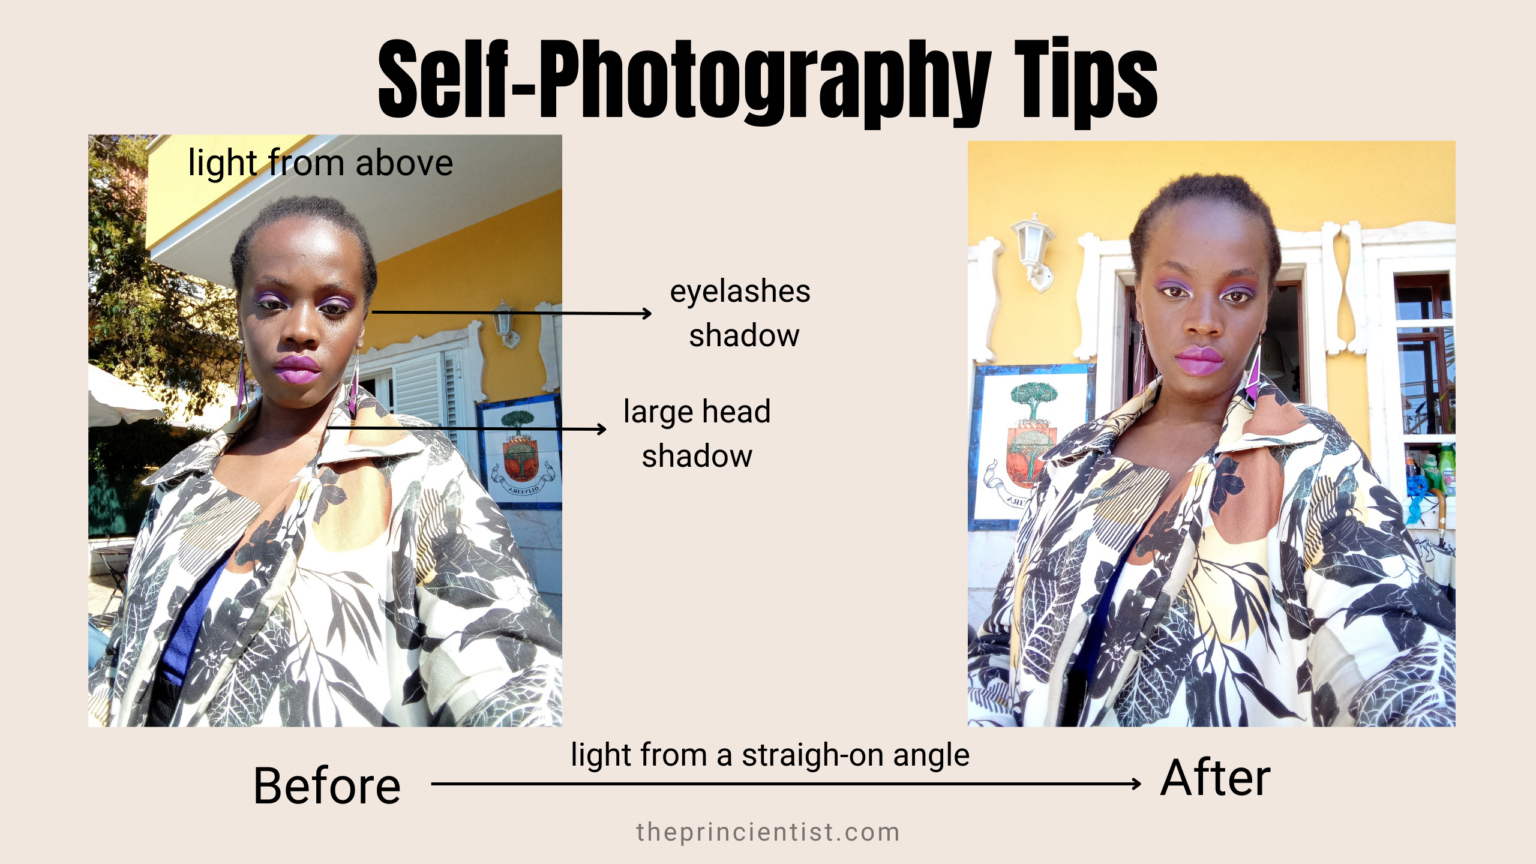 self-photography-tipsfor-beginners-light-for-selfies: comparison light from above and light from an a straight angle